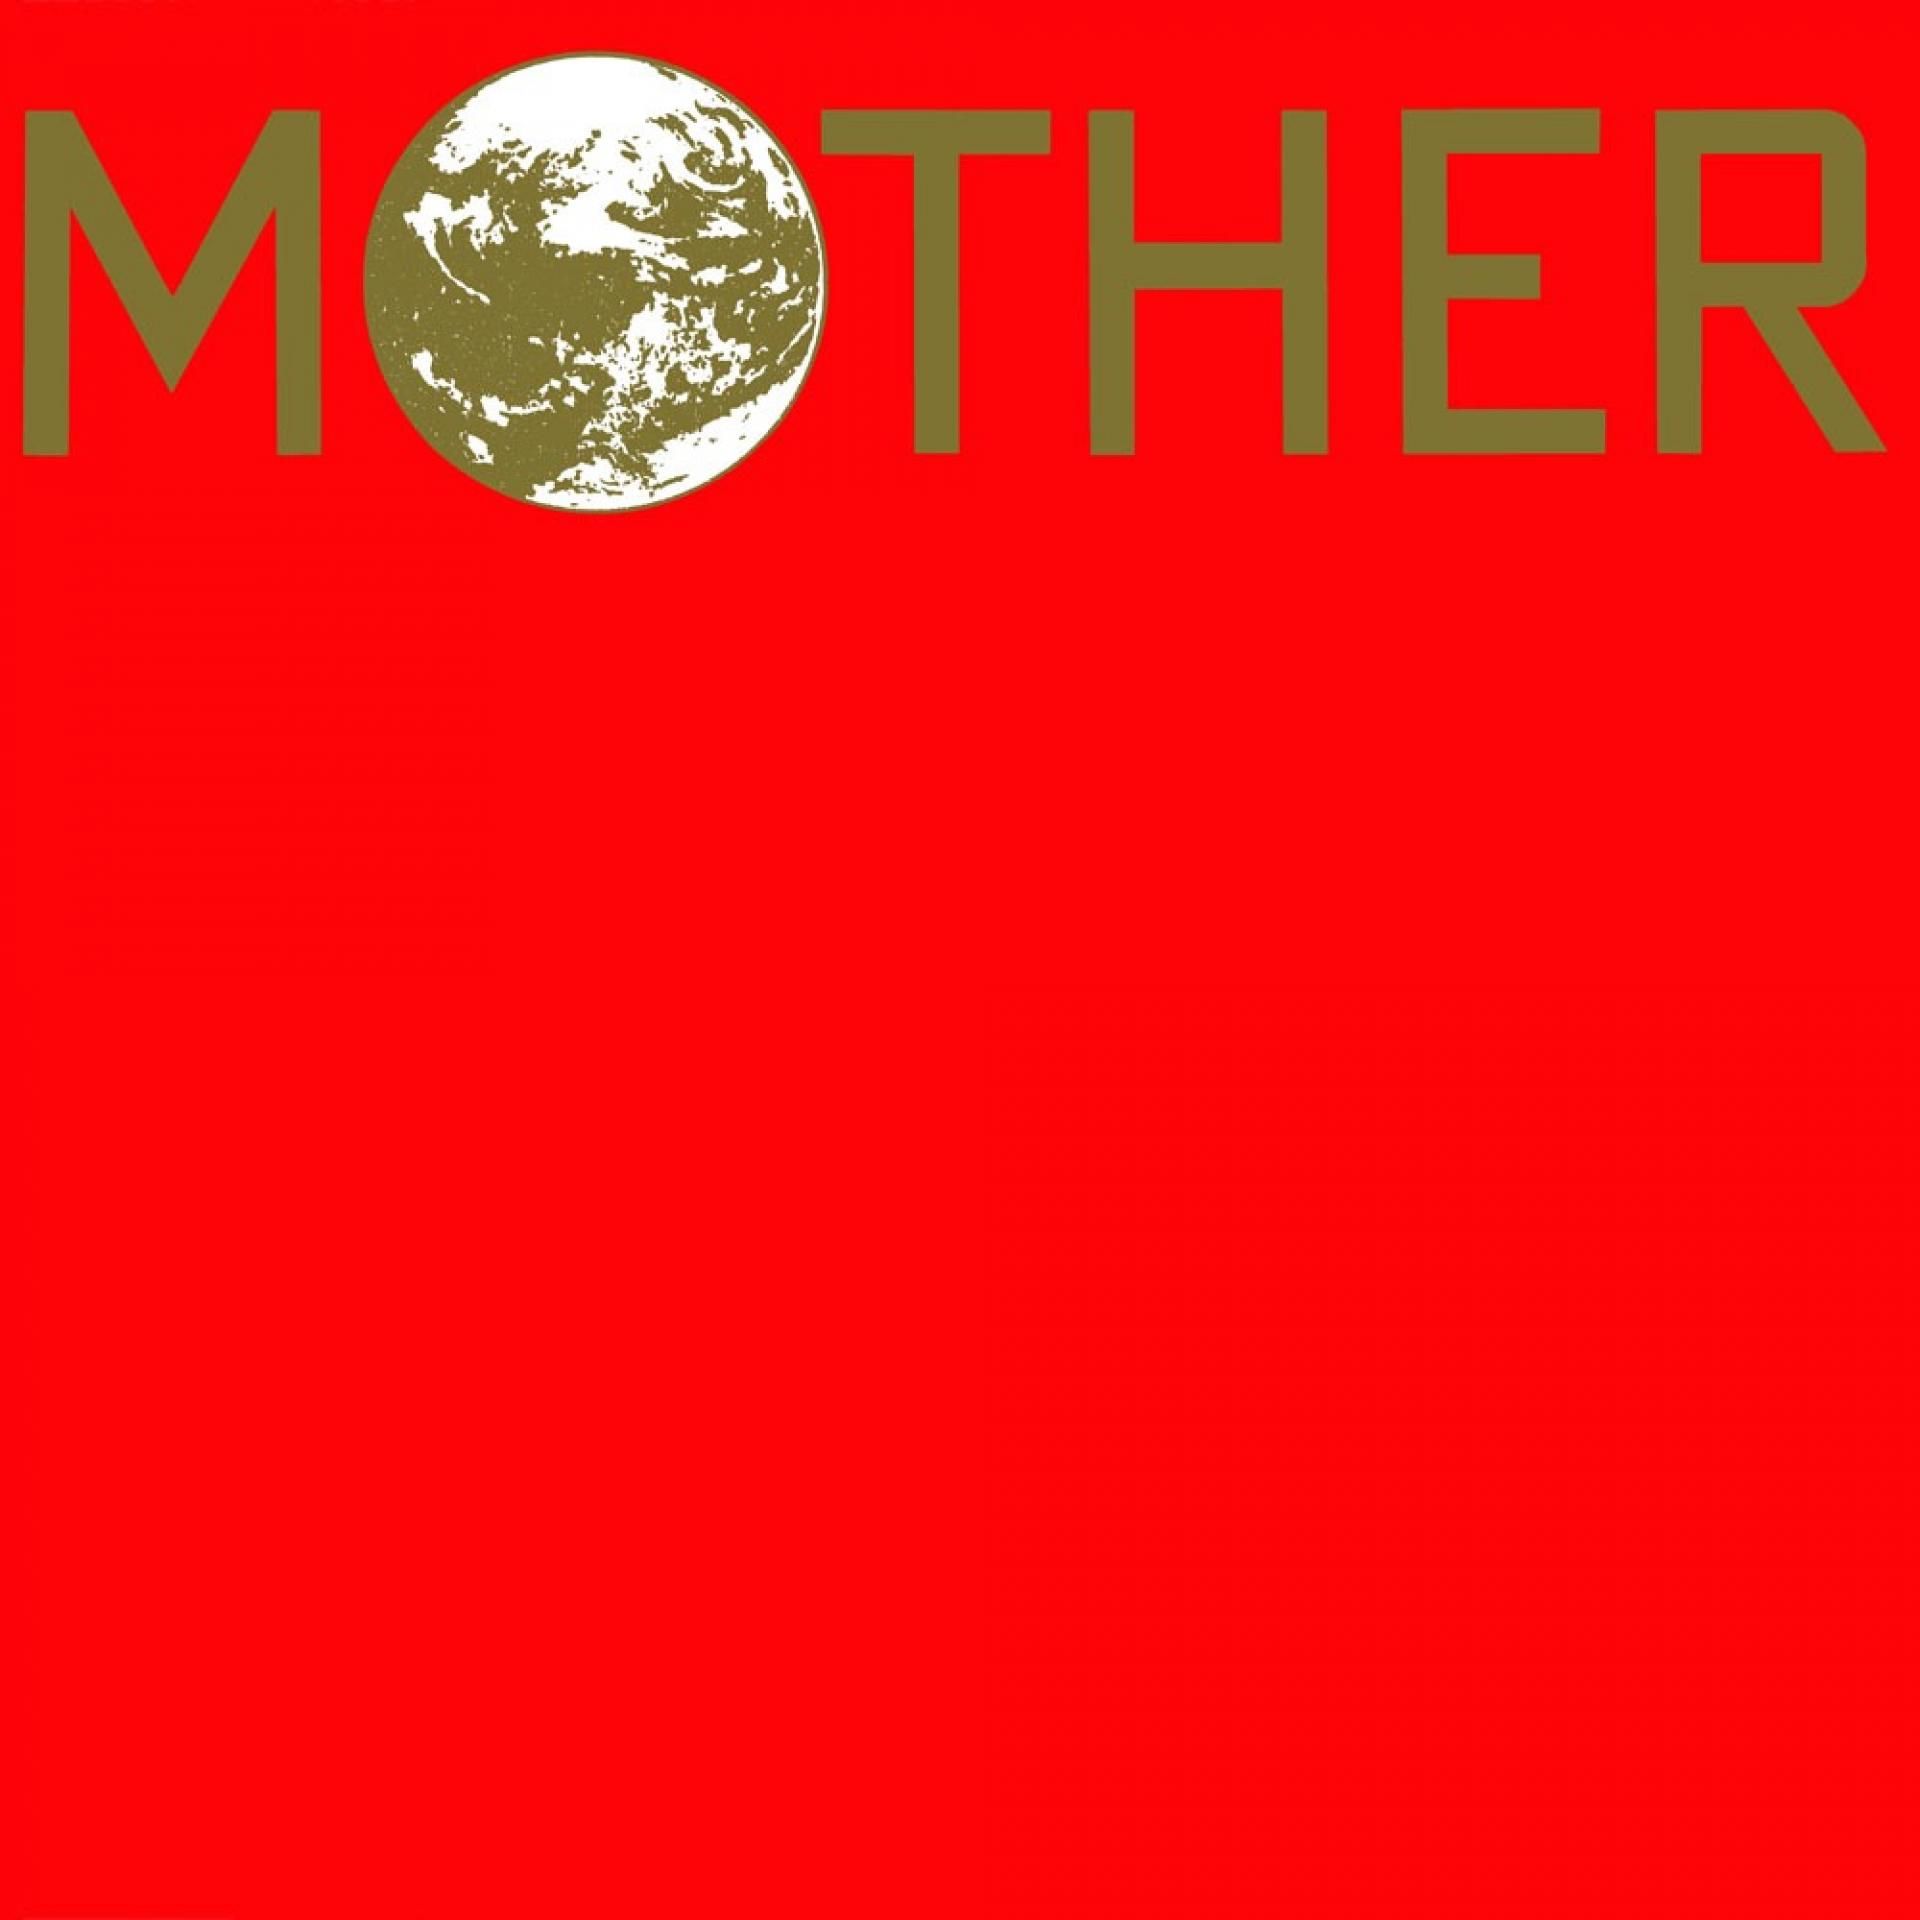 Mother (Game Soundtrack reissue)